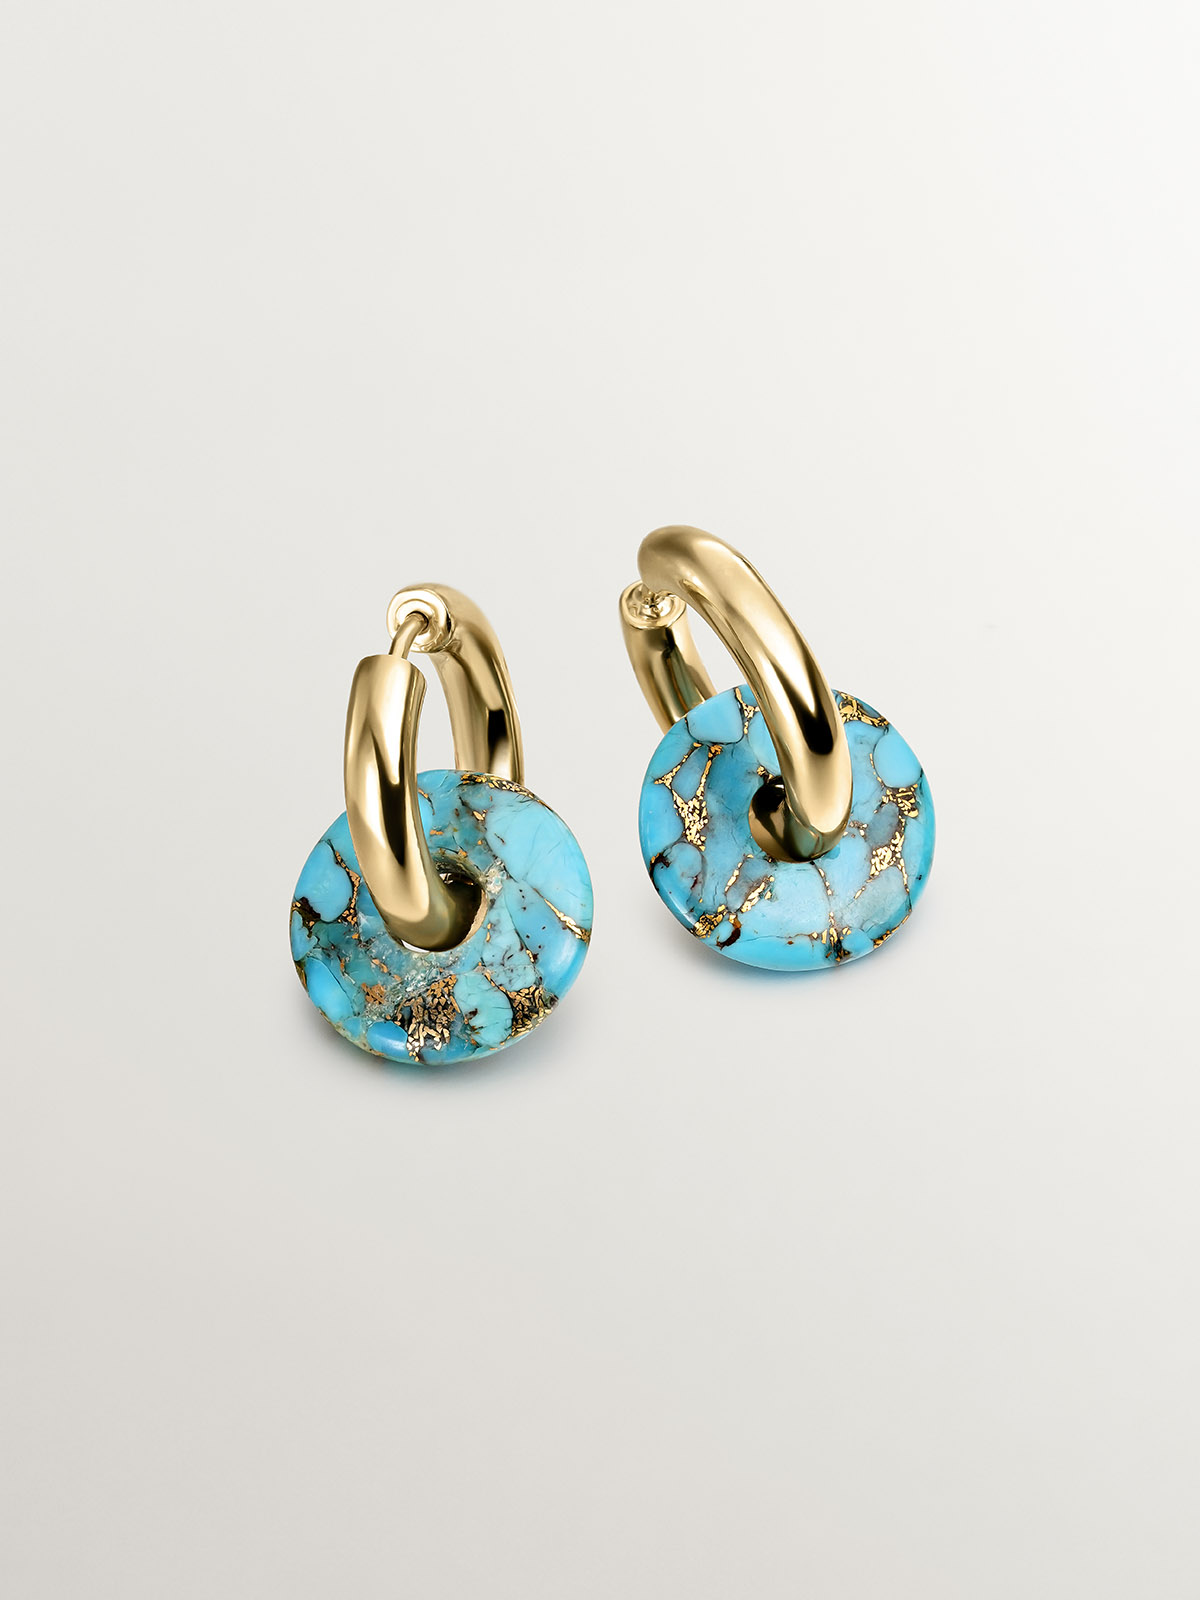 925 Silver hoop earrings bathed in 18K yellow gold with turquoise